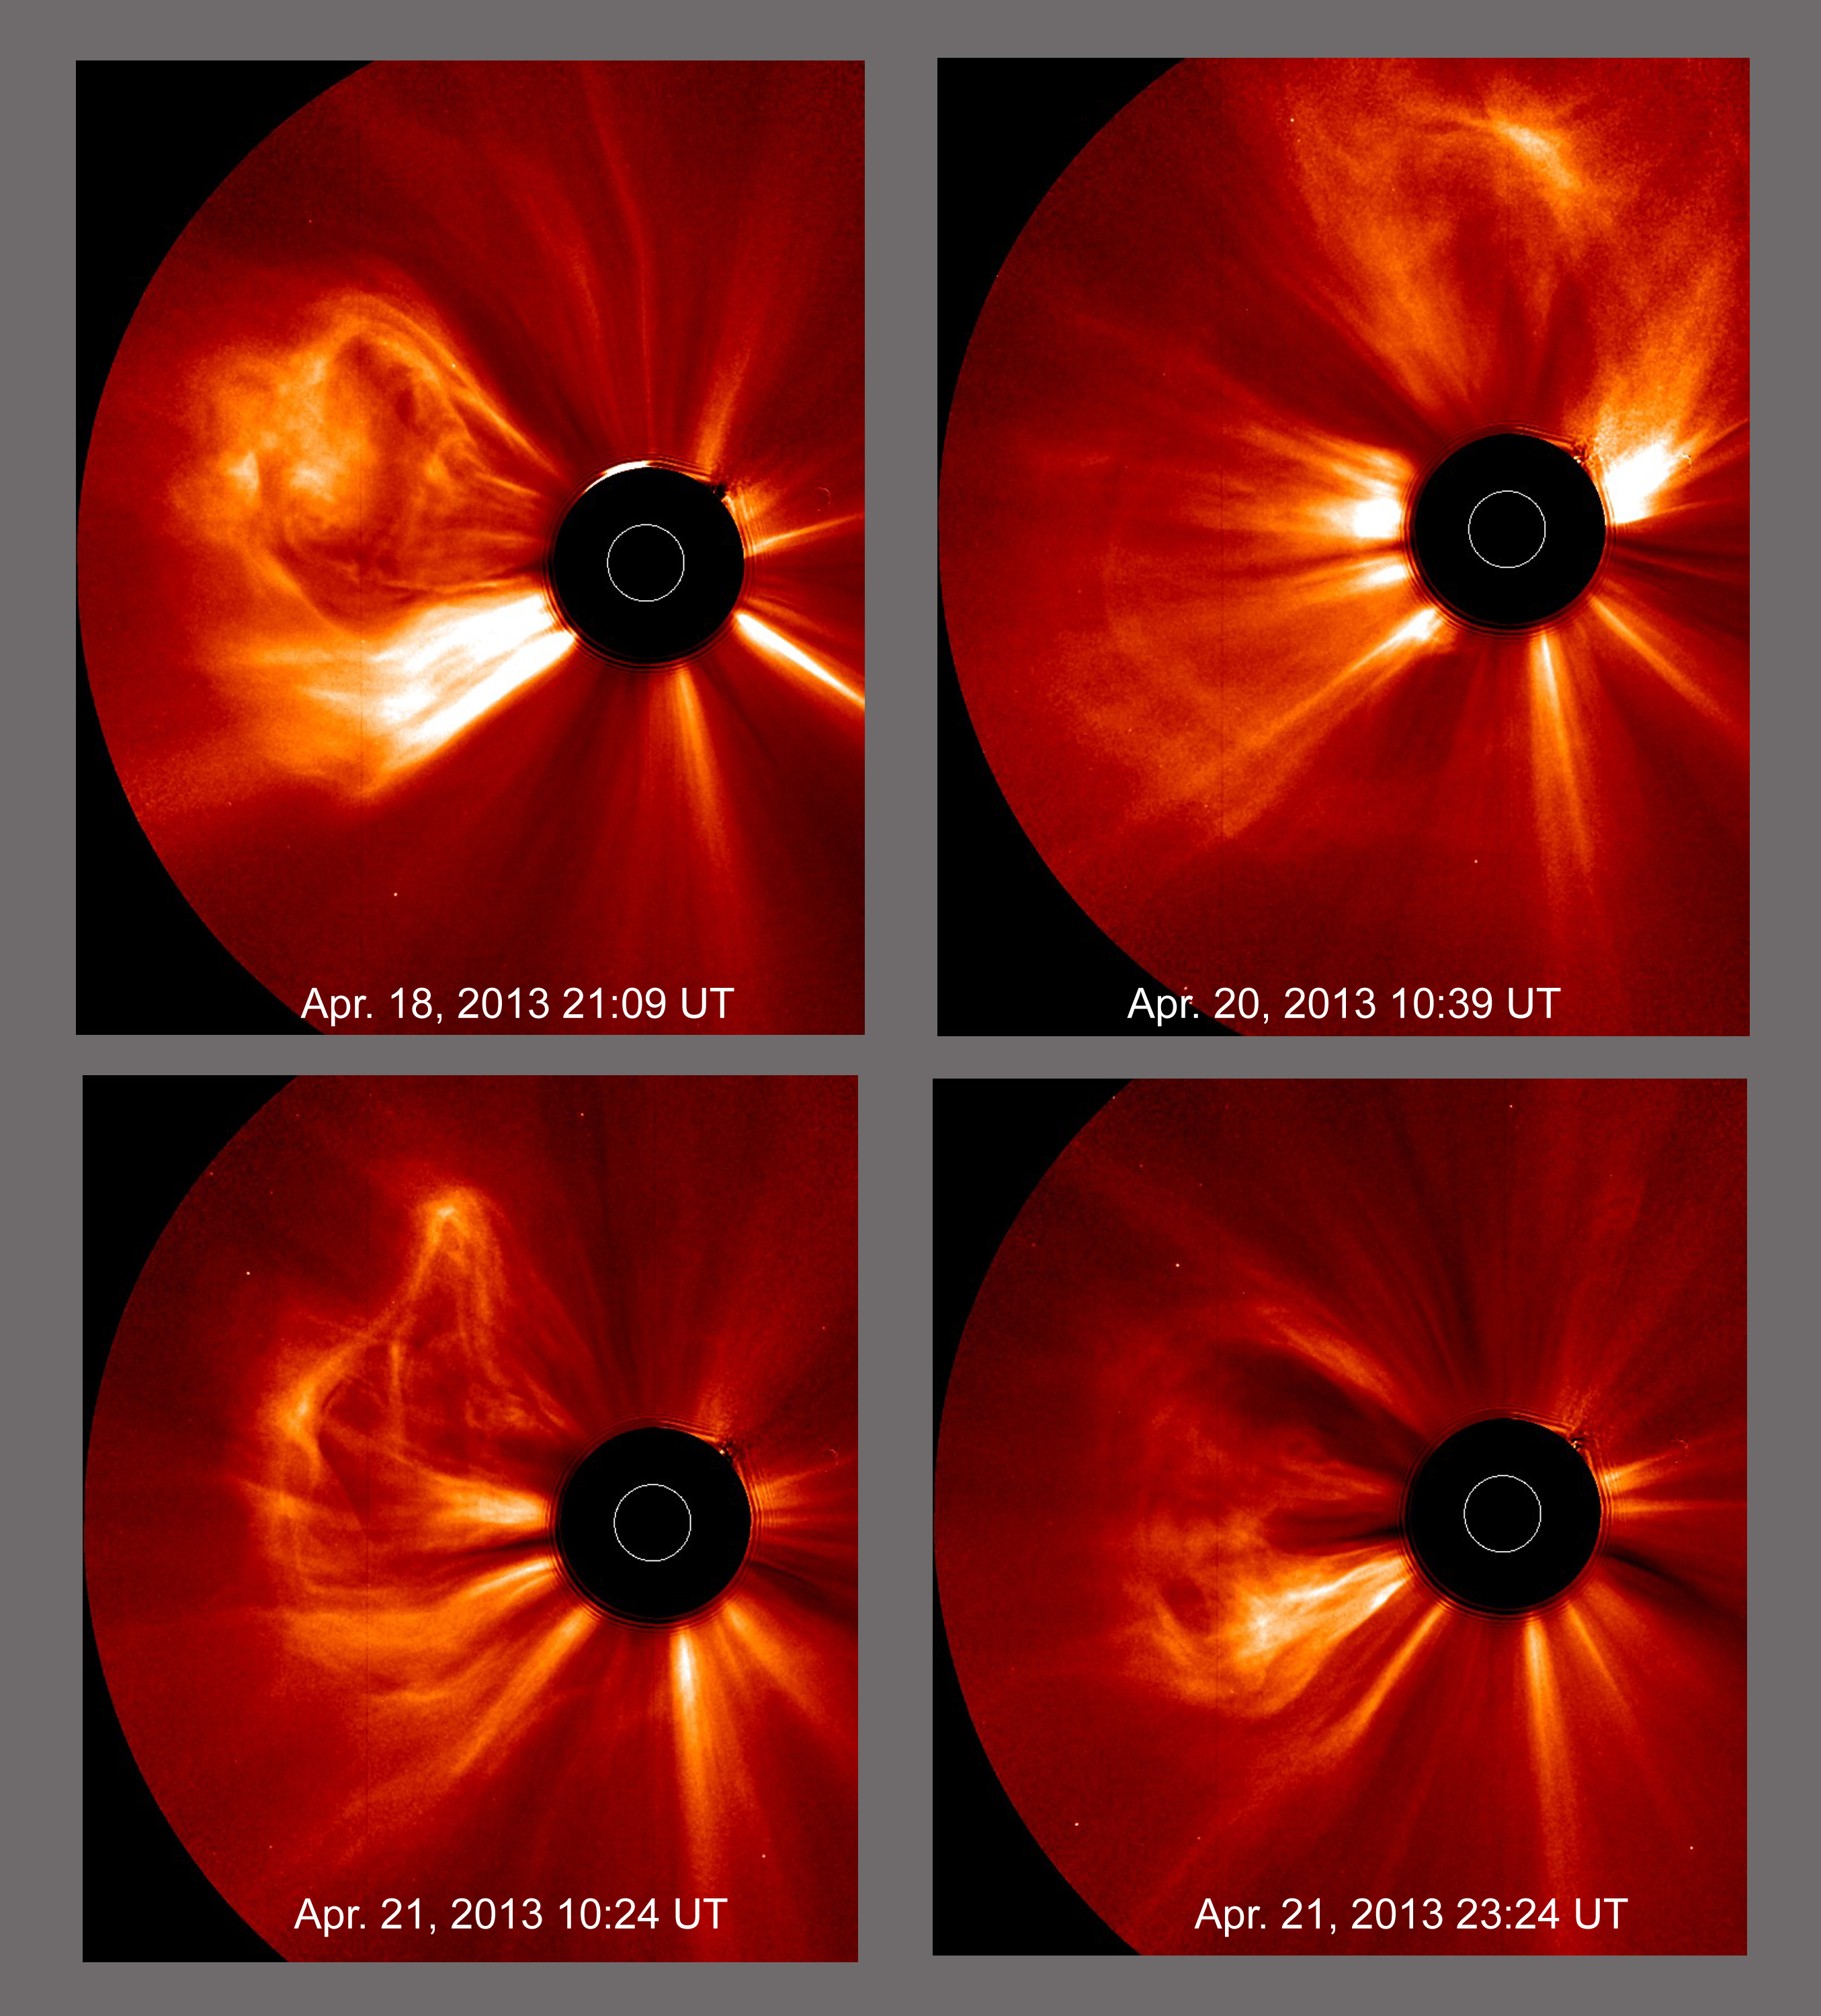 Coronal mass ejections were popping out from the Sun at a pace of two per day on average (Apr. 18-23, 2013). We counted ten CMEs for the five days, but some of the eruptions were complex and difficult to differentiate from one another. Almost all of them blew particles out to the left, most of them probably originating from the same active region. These were taken by the STEREO (Ahead) spacecraft's coronagraph, in which the black disk blocks the Sun (represented by the white circle) so that we can observe the fainter features beyond it. Credit: NASA/STEREO